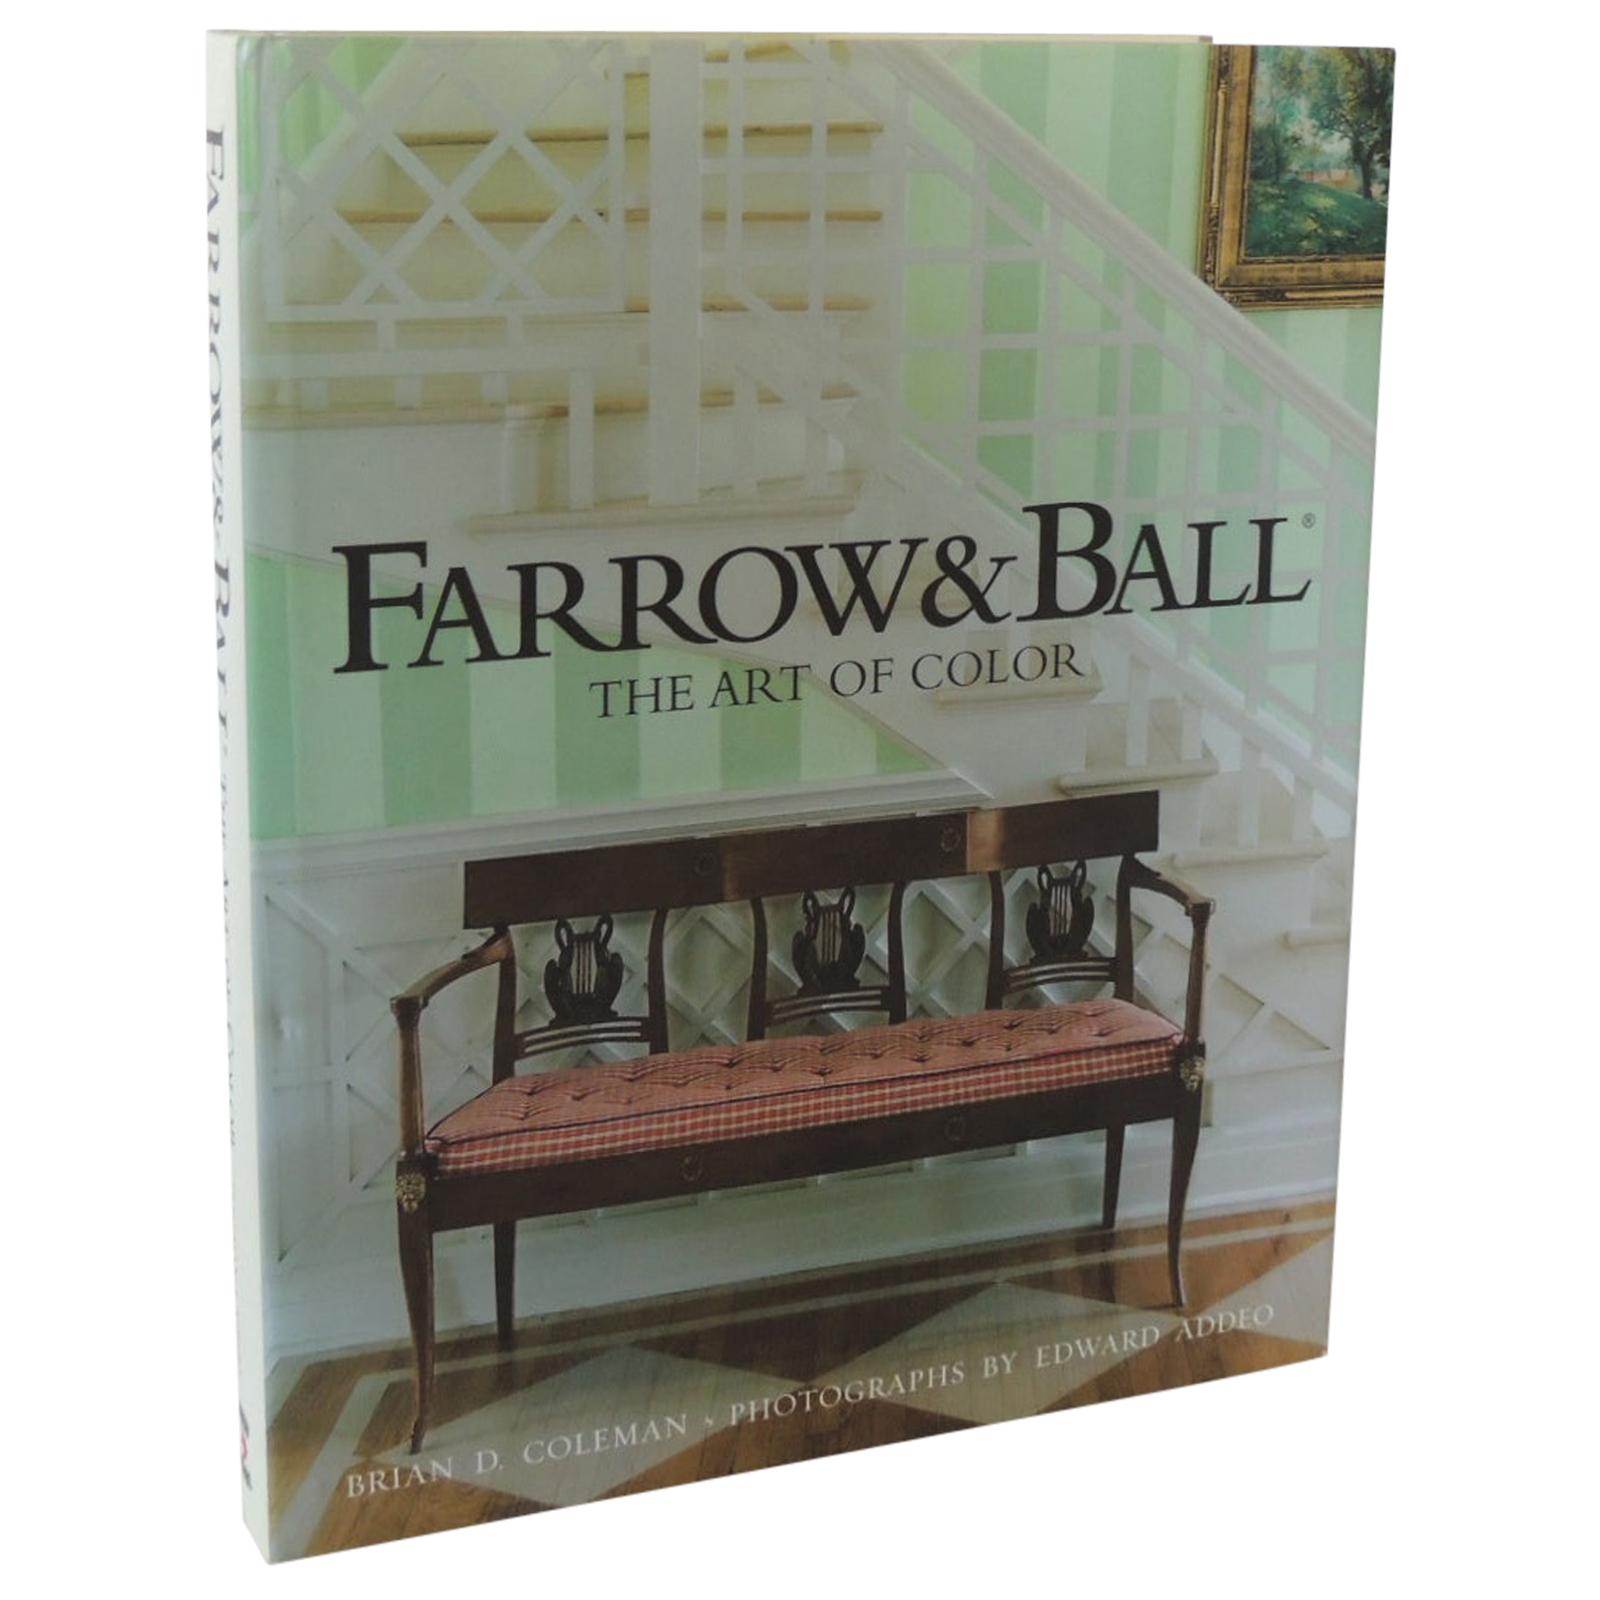 Farrow & Ball the Art of Color Vintage Hard-Cover Decorative Coffee Table Book